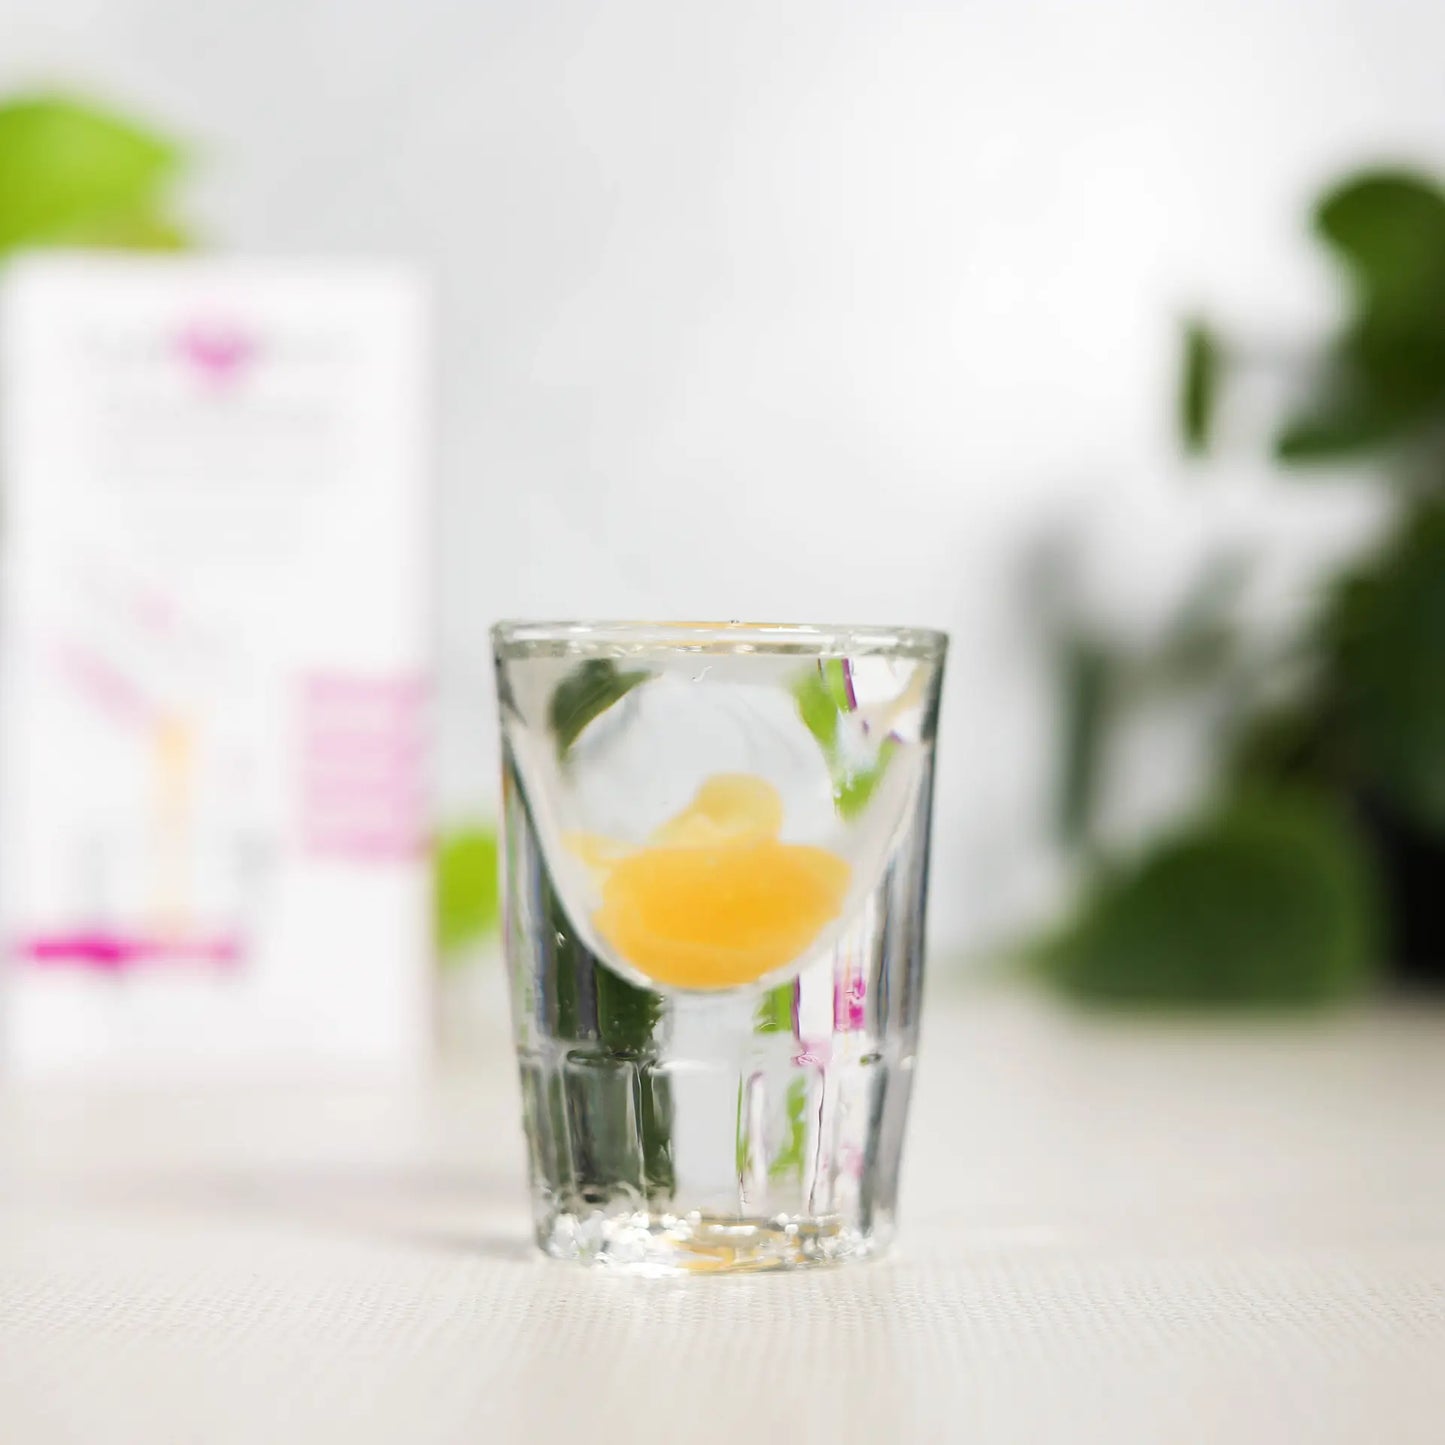 shot glass of lypo-spheric glutathione with carton in background